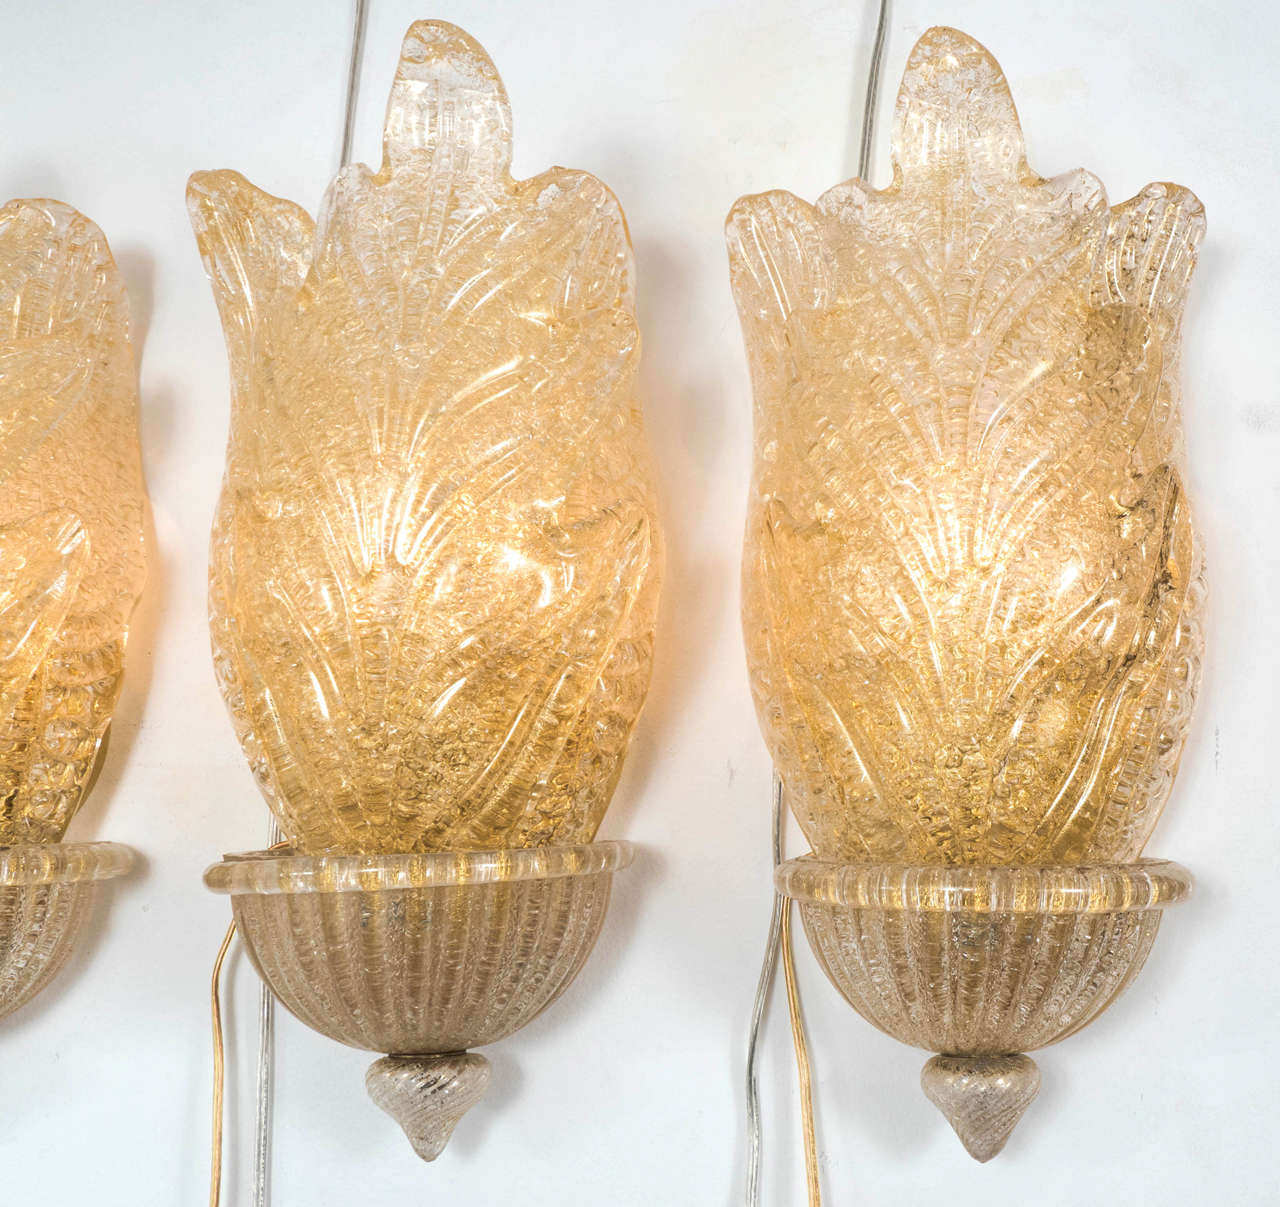 Pair of Murano glass sconces composed of clustered leaf elements featuring inclusive air bubbles and gold flecks.